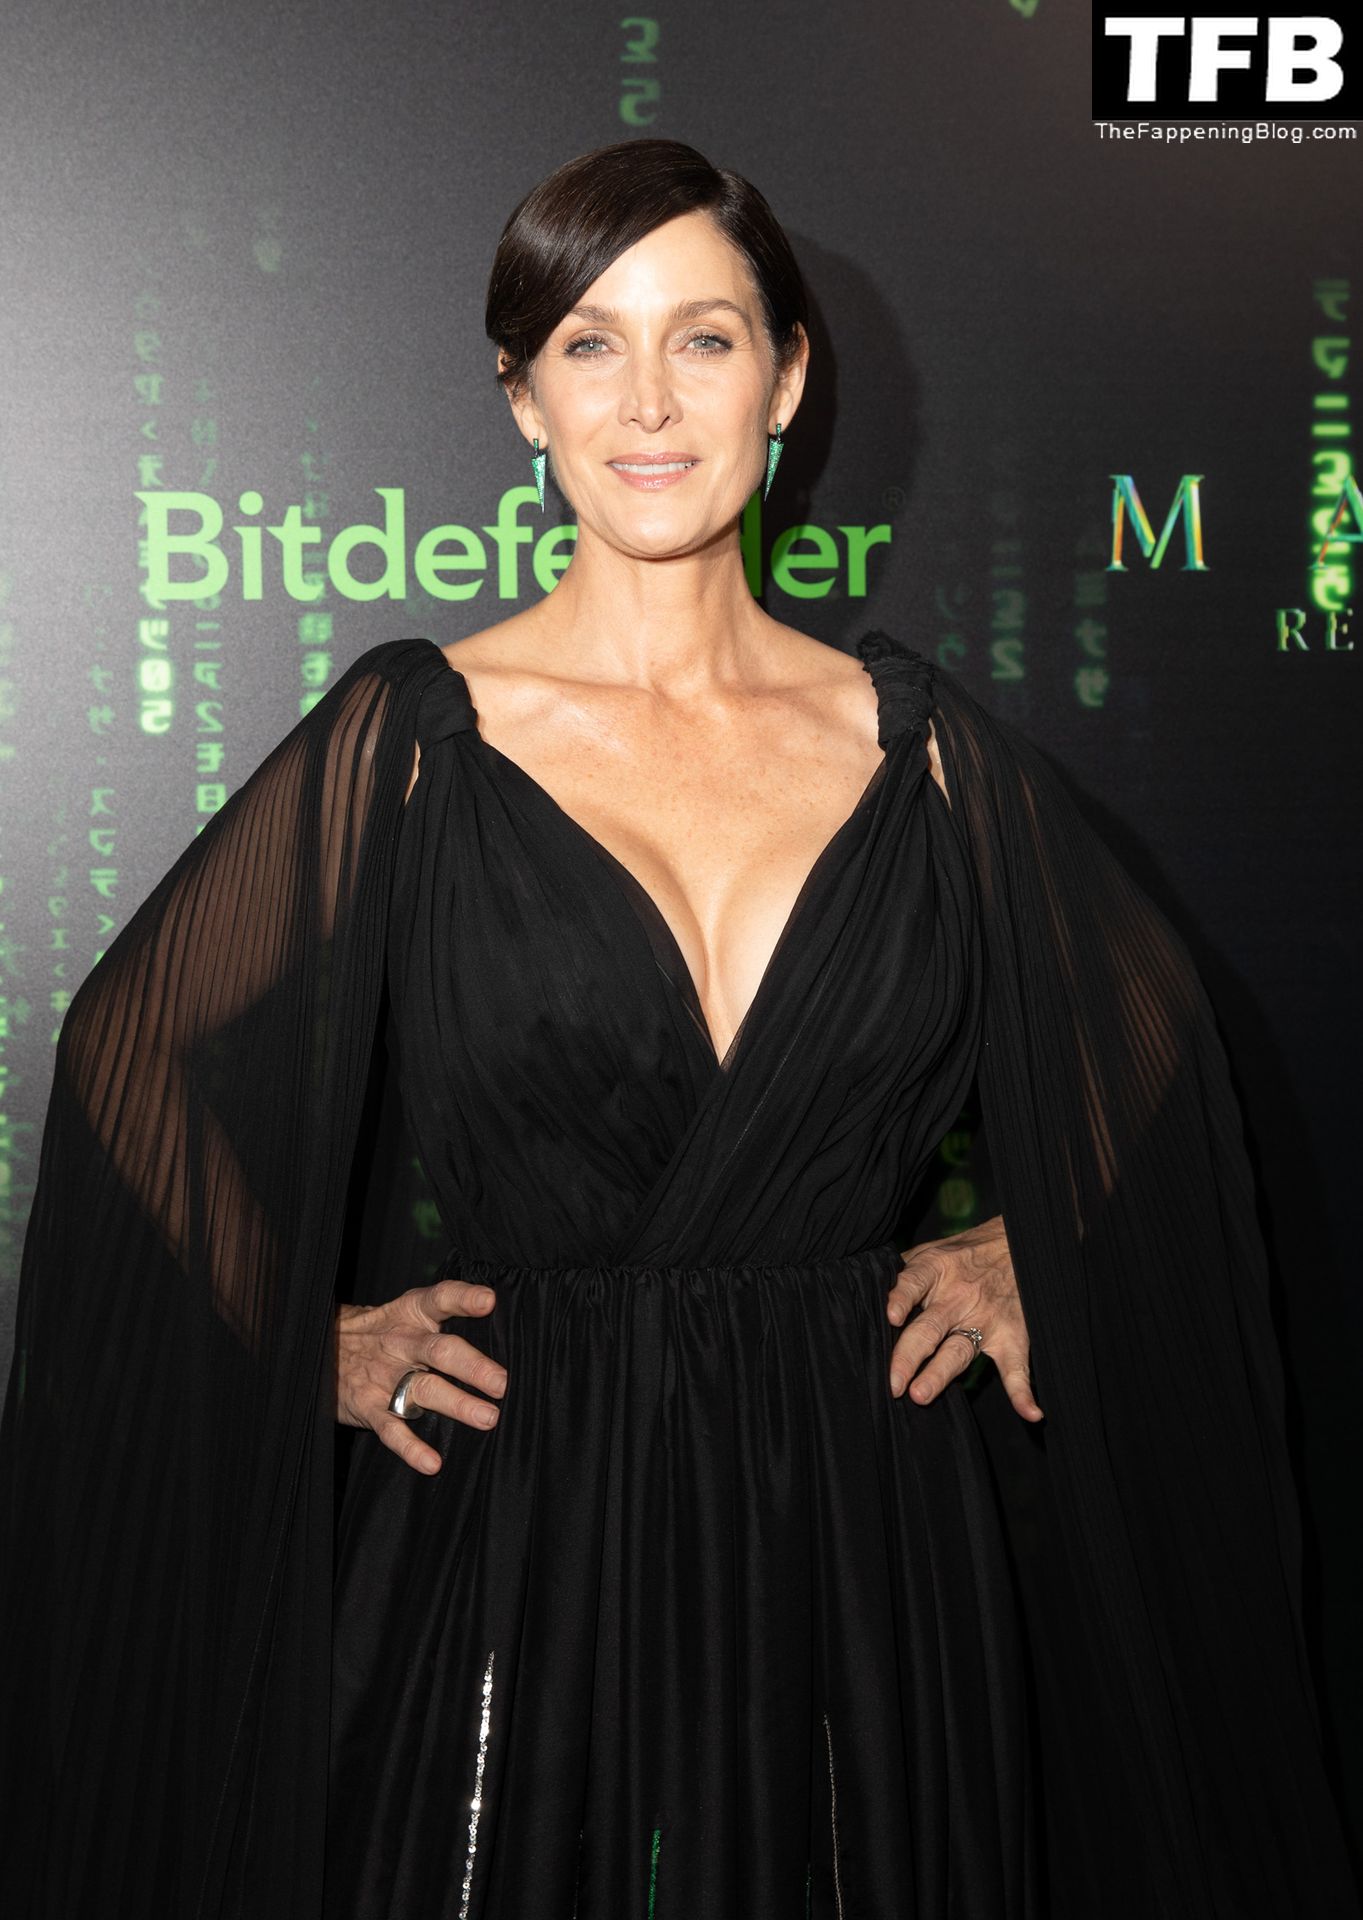 Carrie-Anne-Moss-Sexy-The-Fappening-Blog-11.jpg